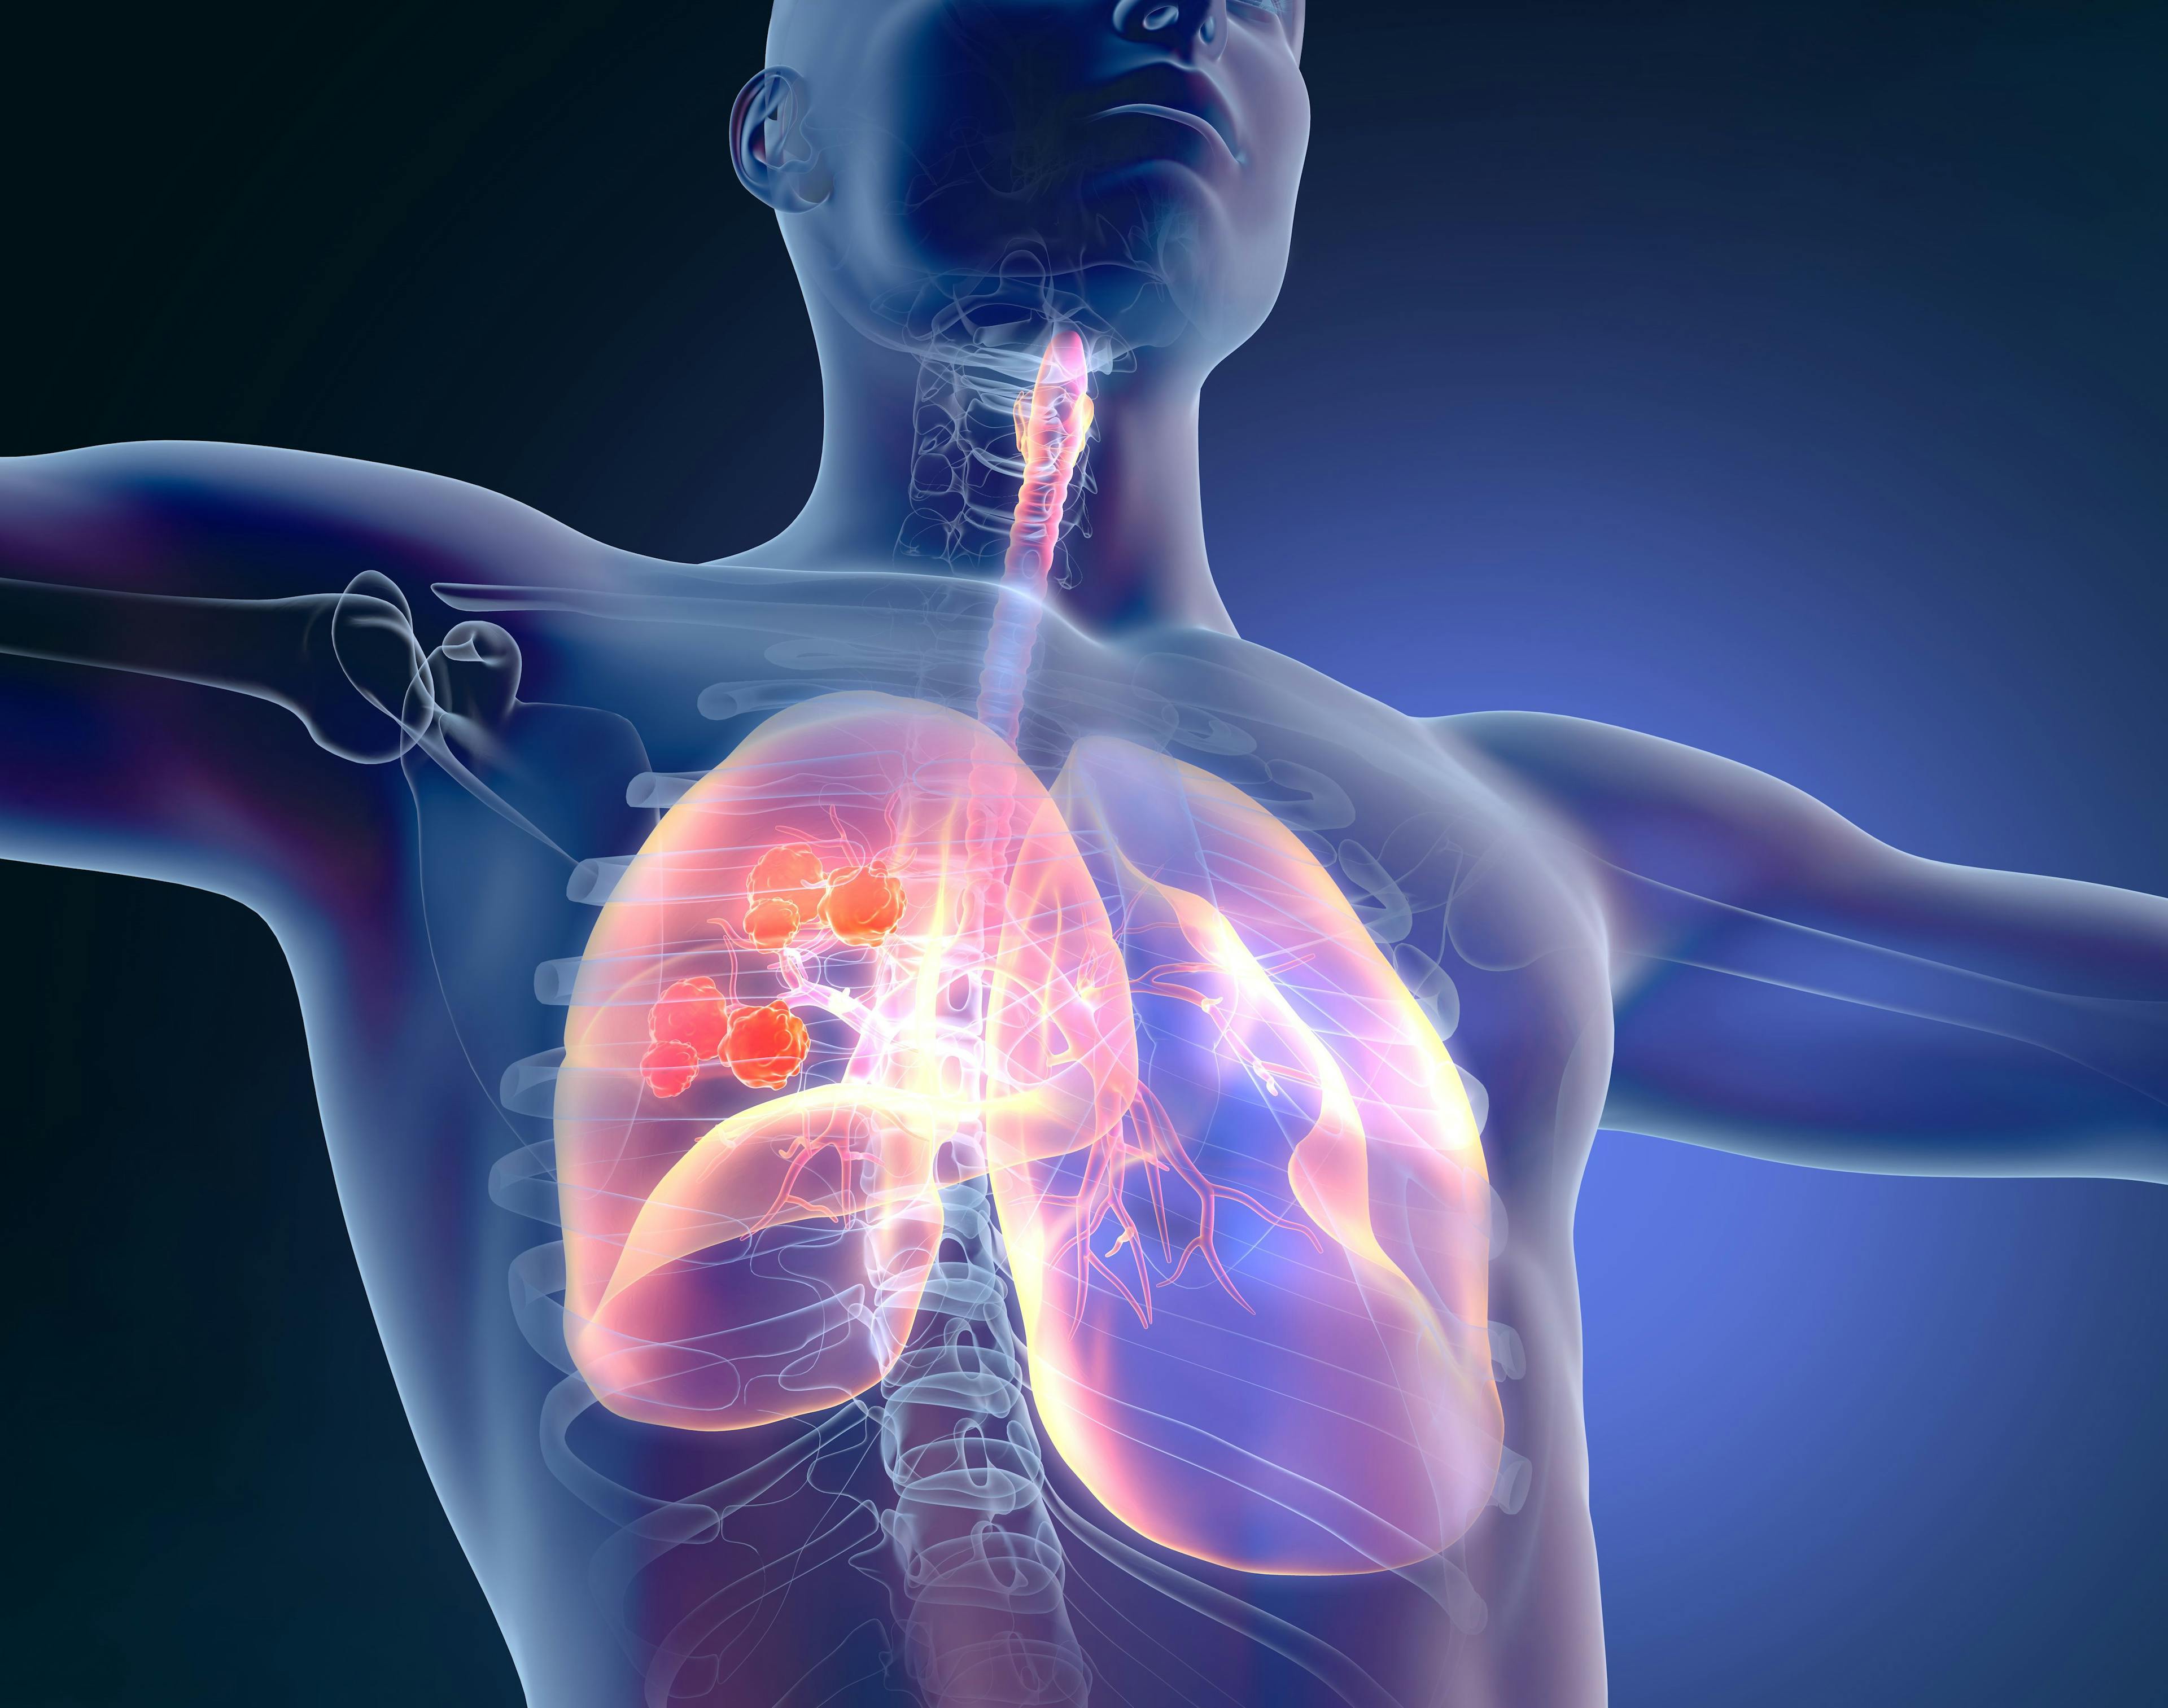 Sotorasib to Treat KRAS p.G12C+ NSCLC Produced Durable Clinical Benefit